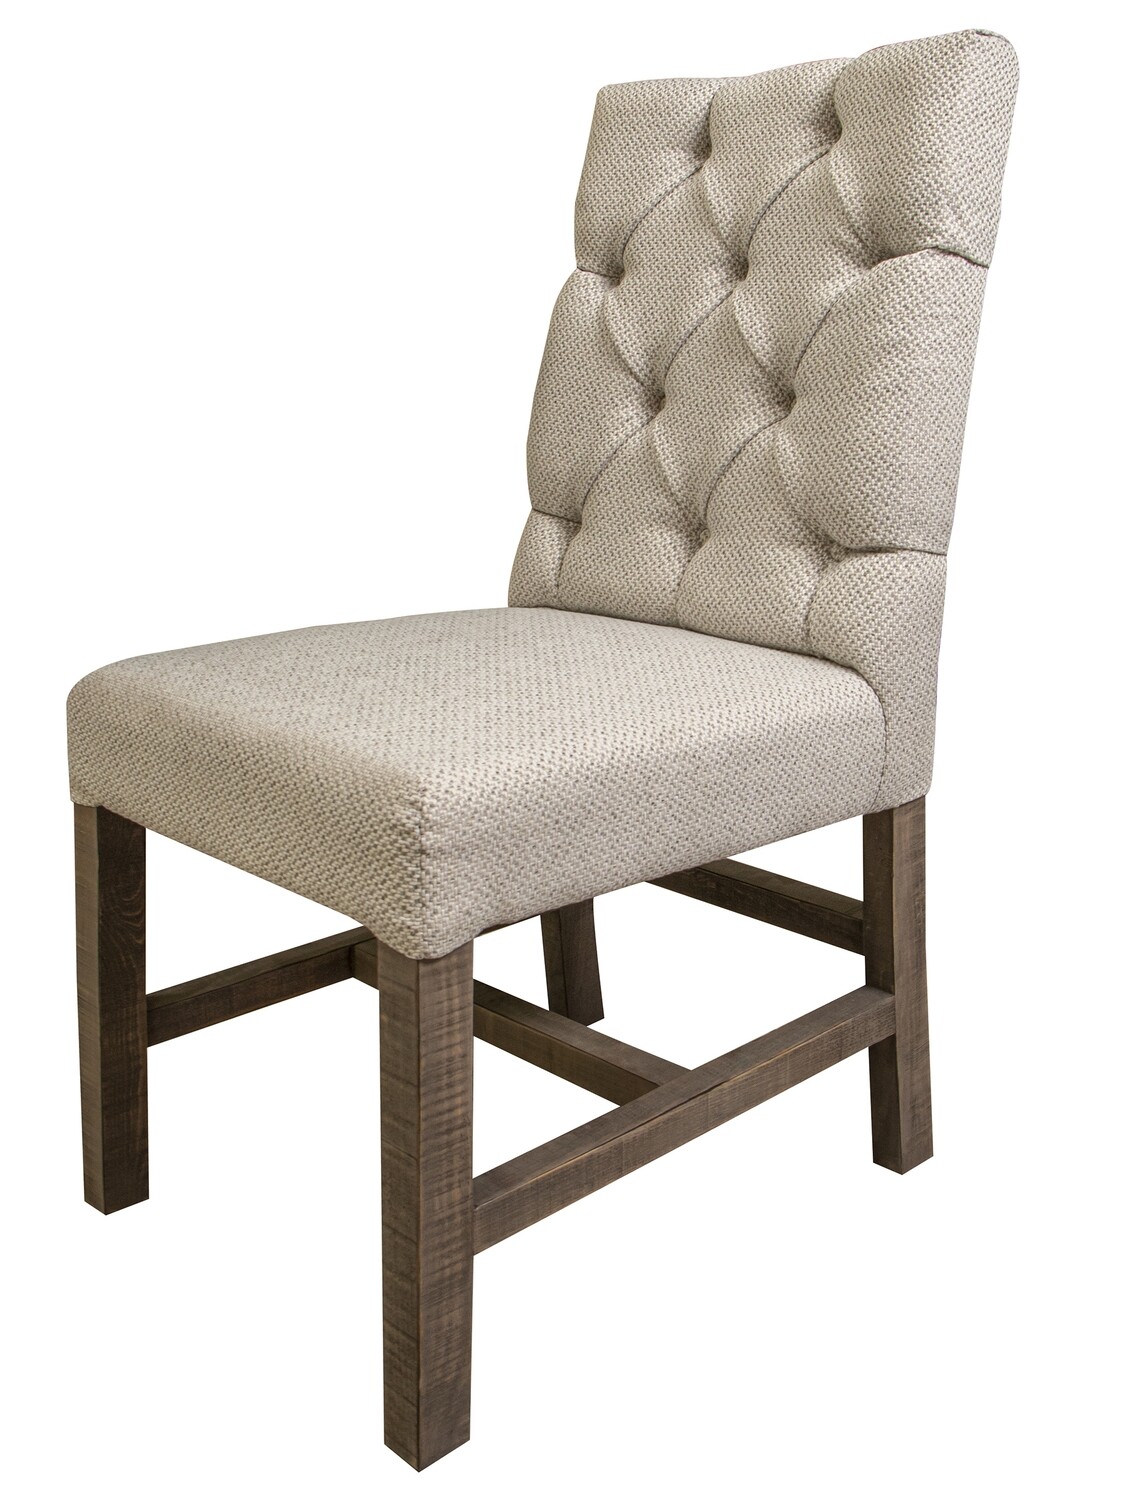 MARBLE- UPH DINING CHAIR